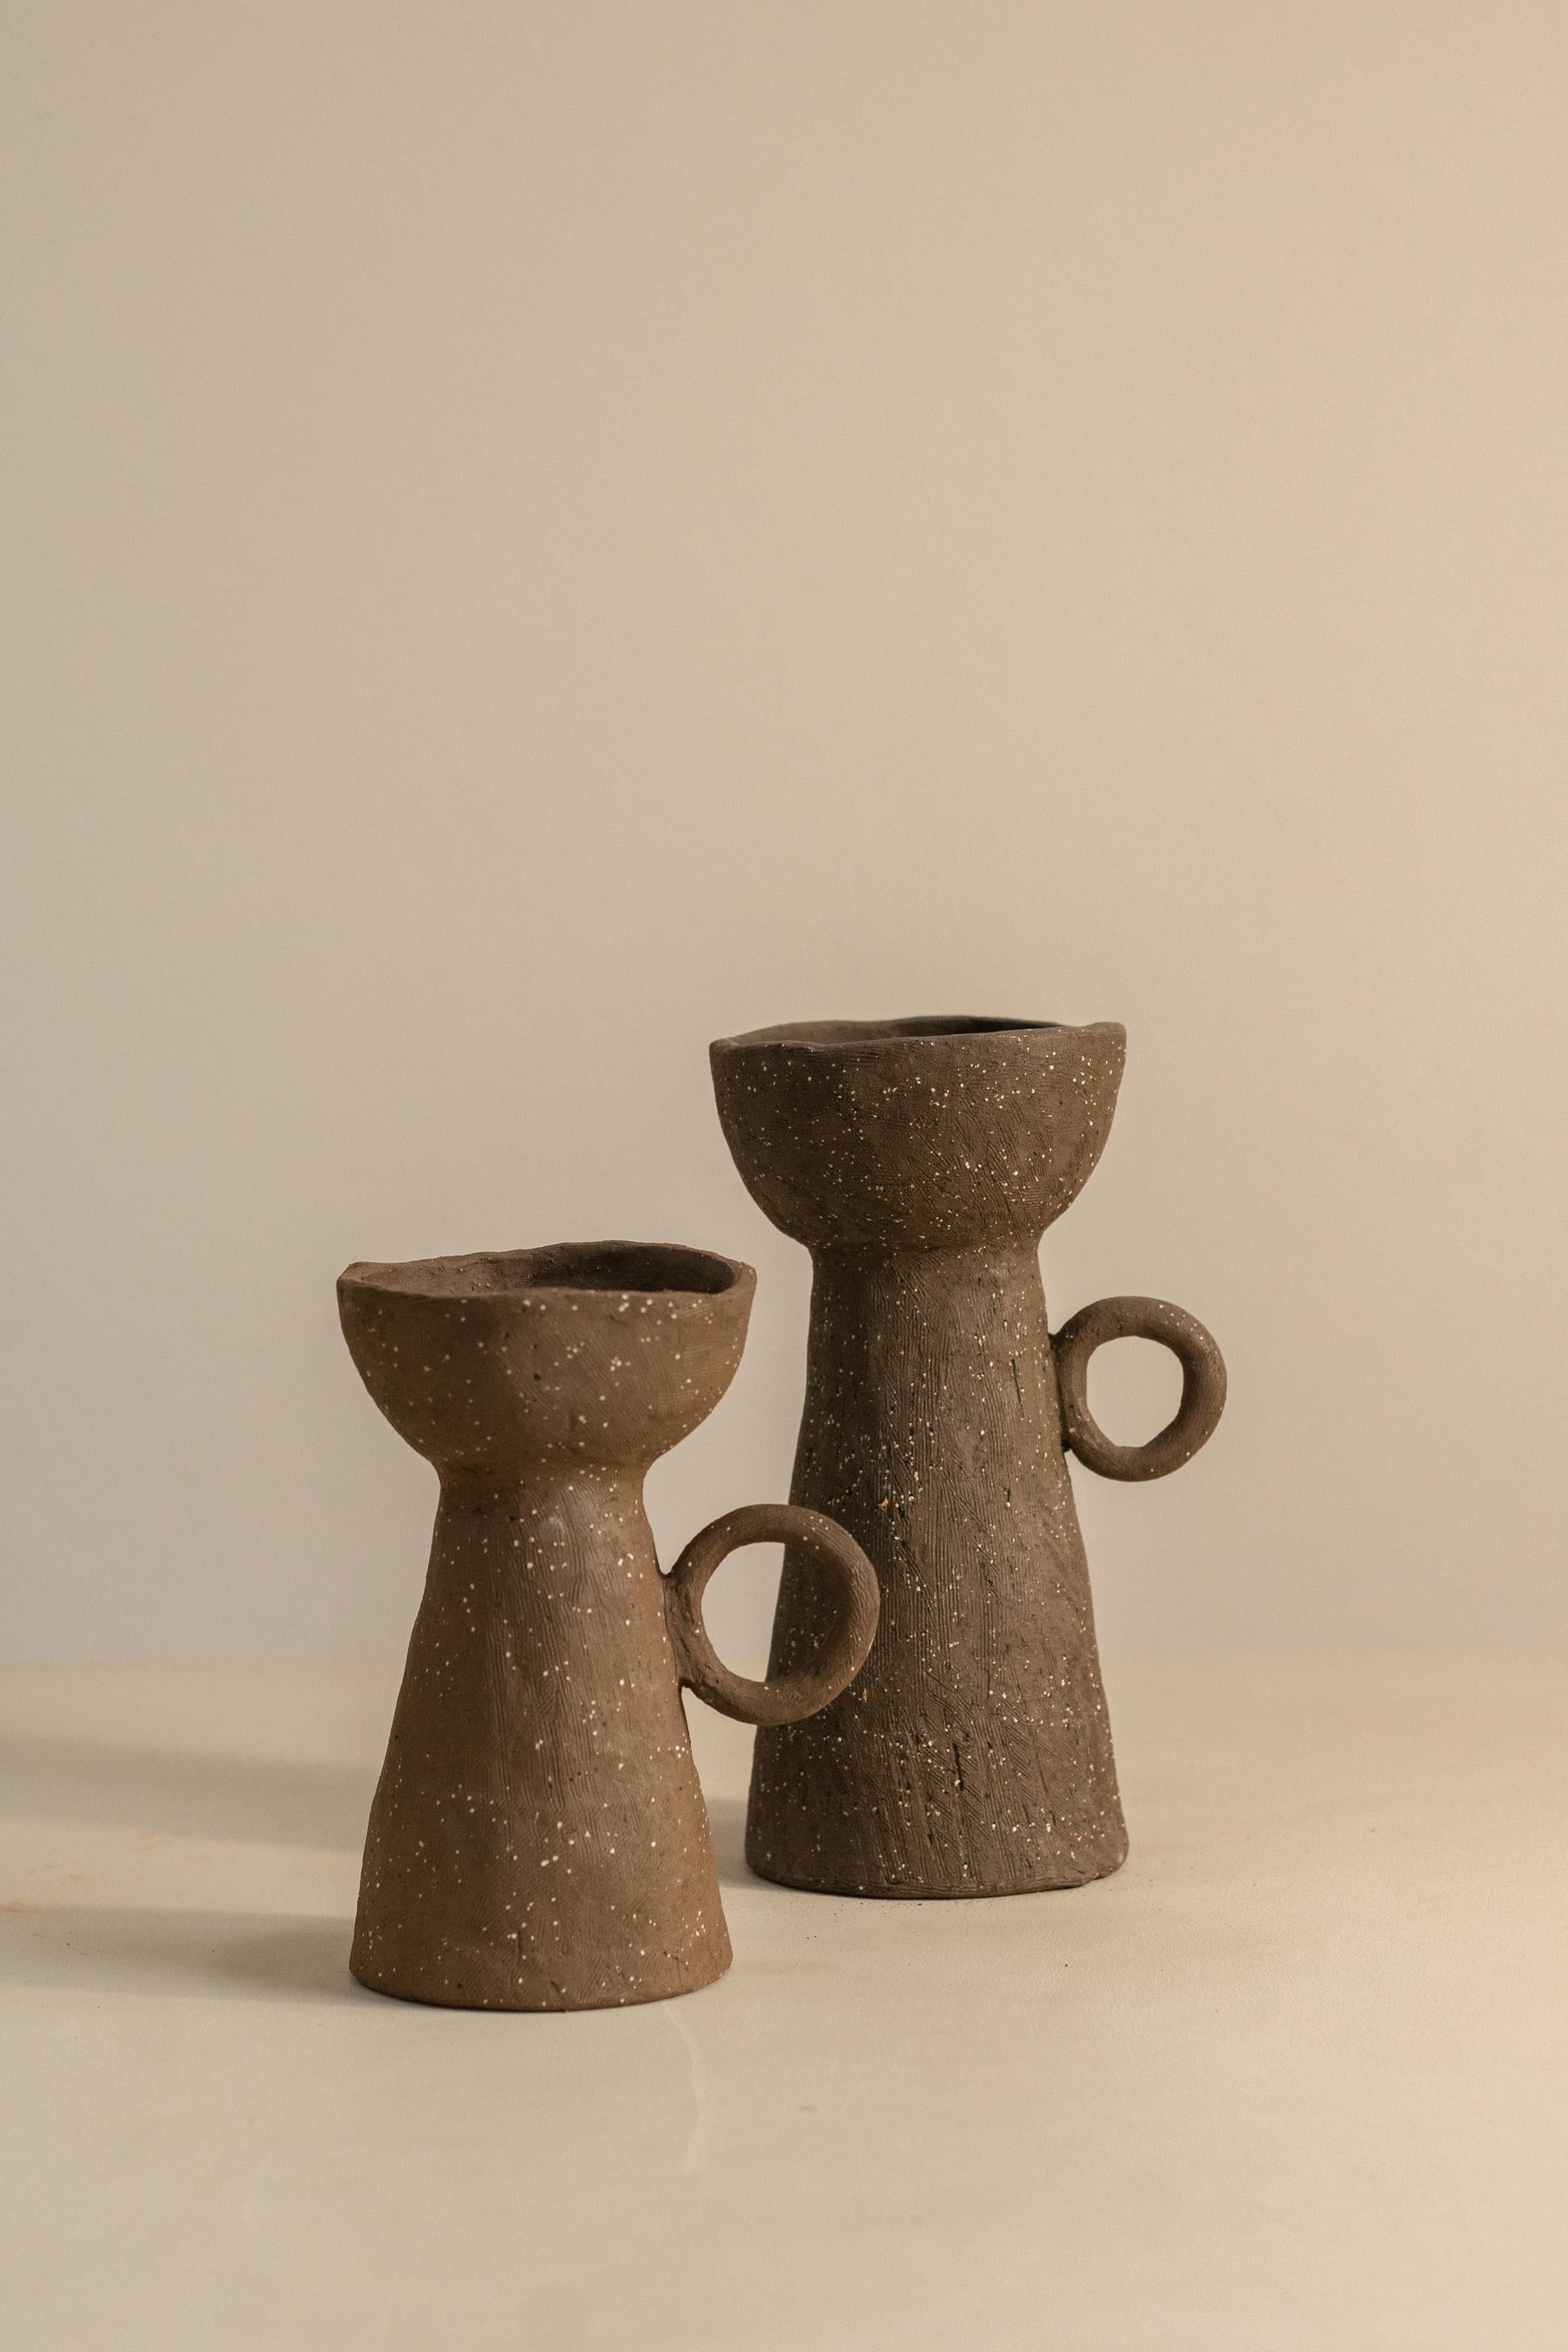 This pair of candleholder is part of the brutalism series and brings aesthetic references to the homonymous movement of modern architecture that emphasized the 